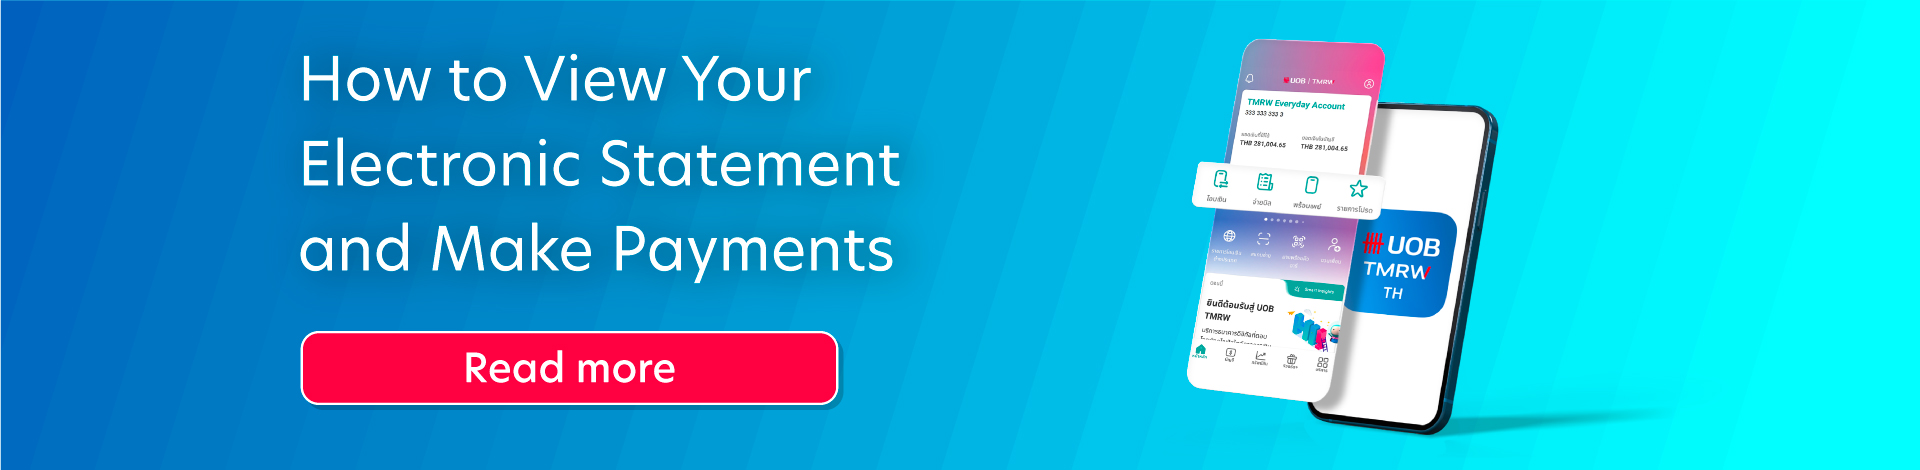 How to view your electronic statement and make payments